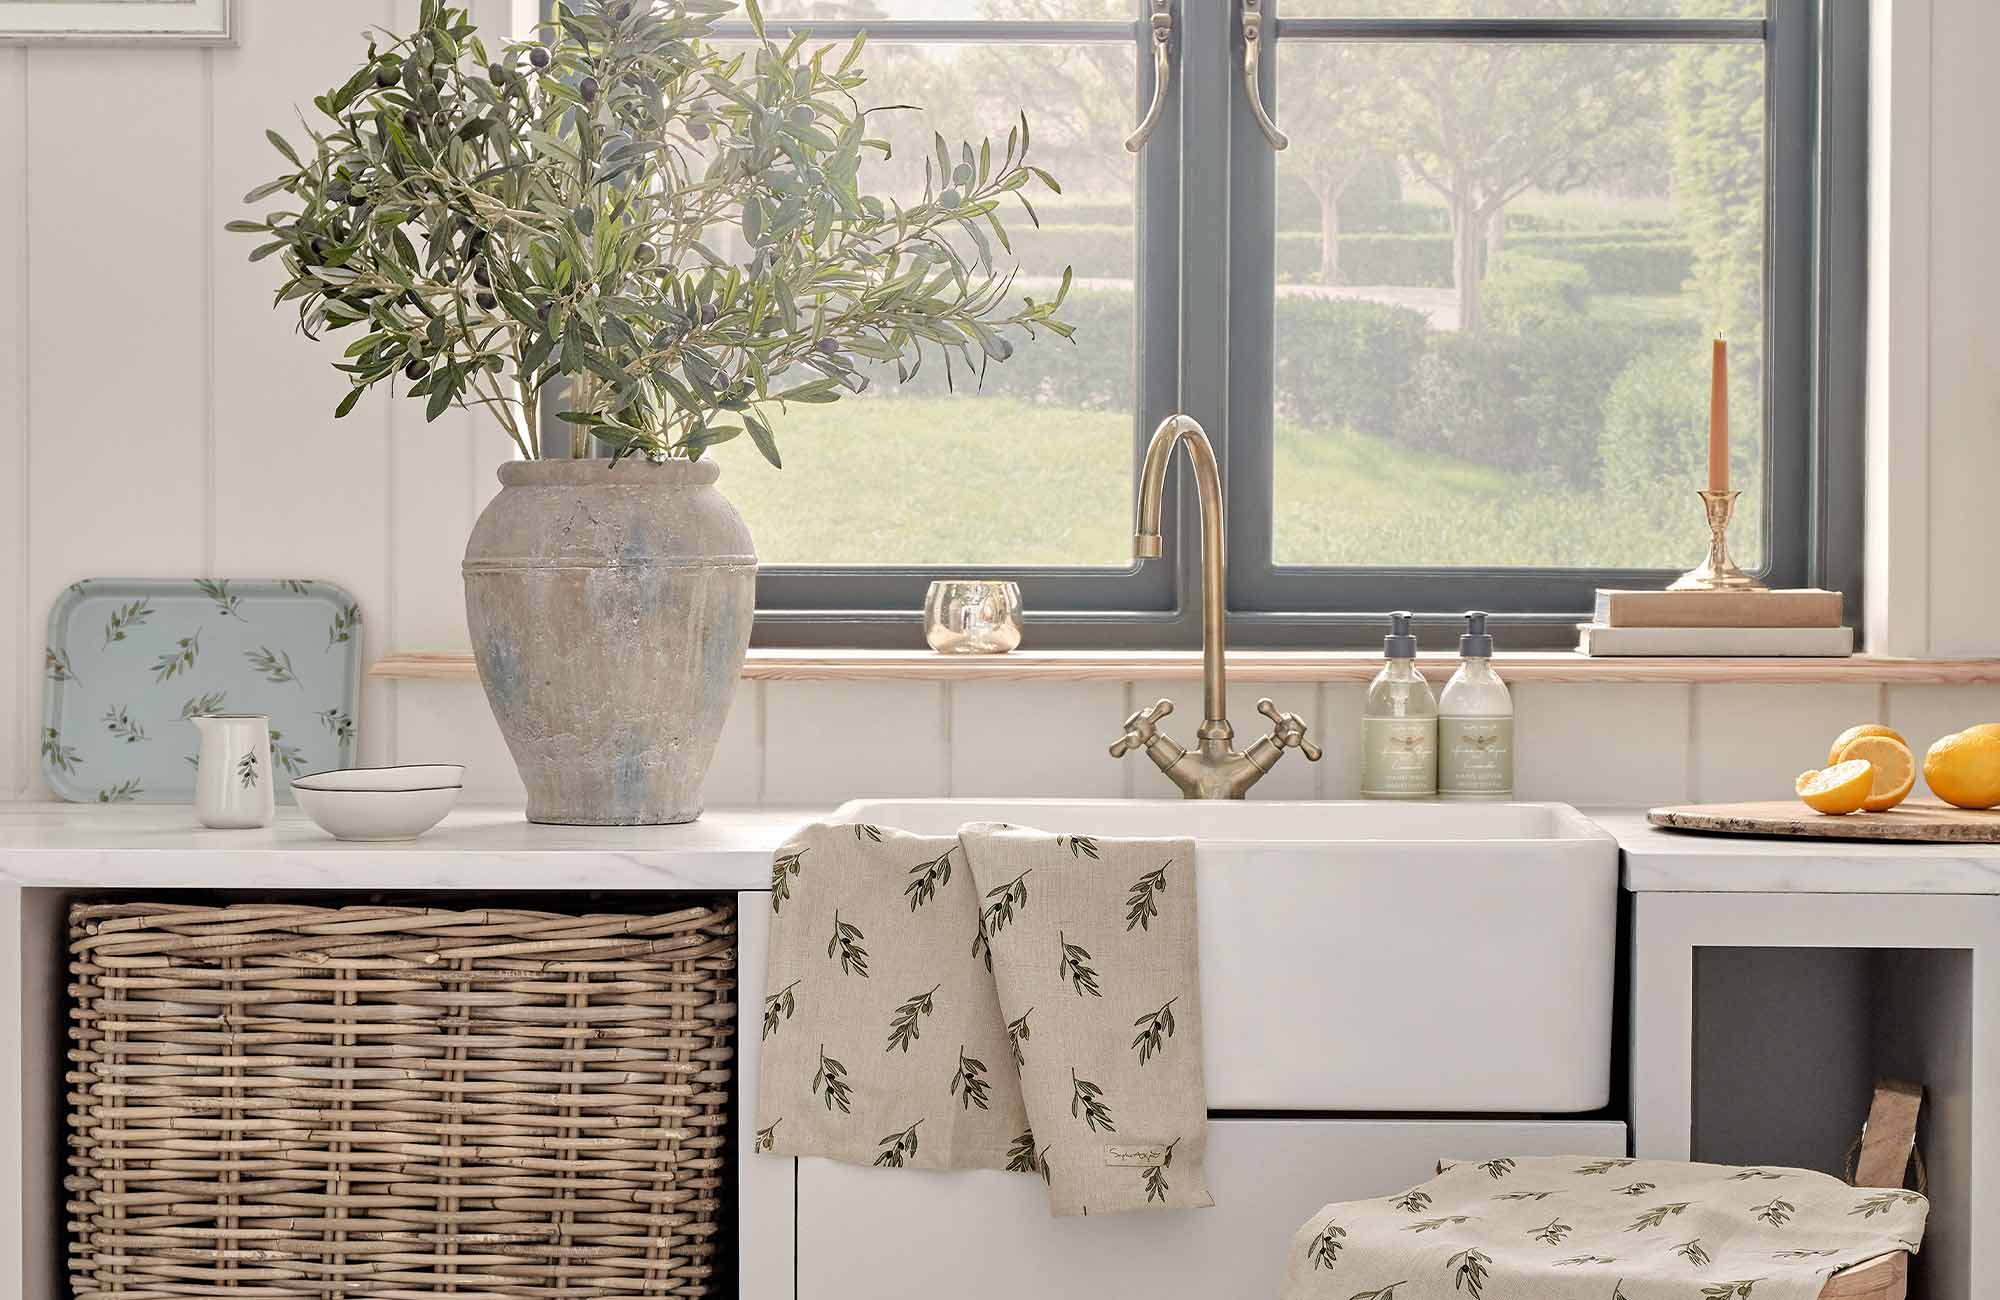 How to Wash and Look After Your Tea Towels